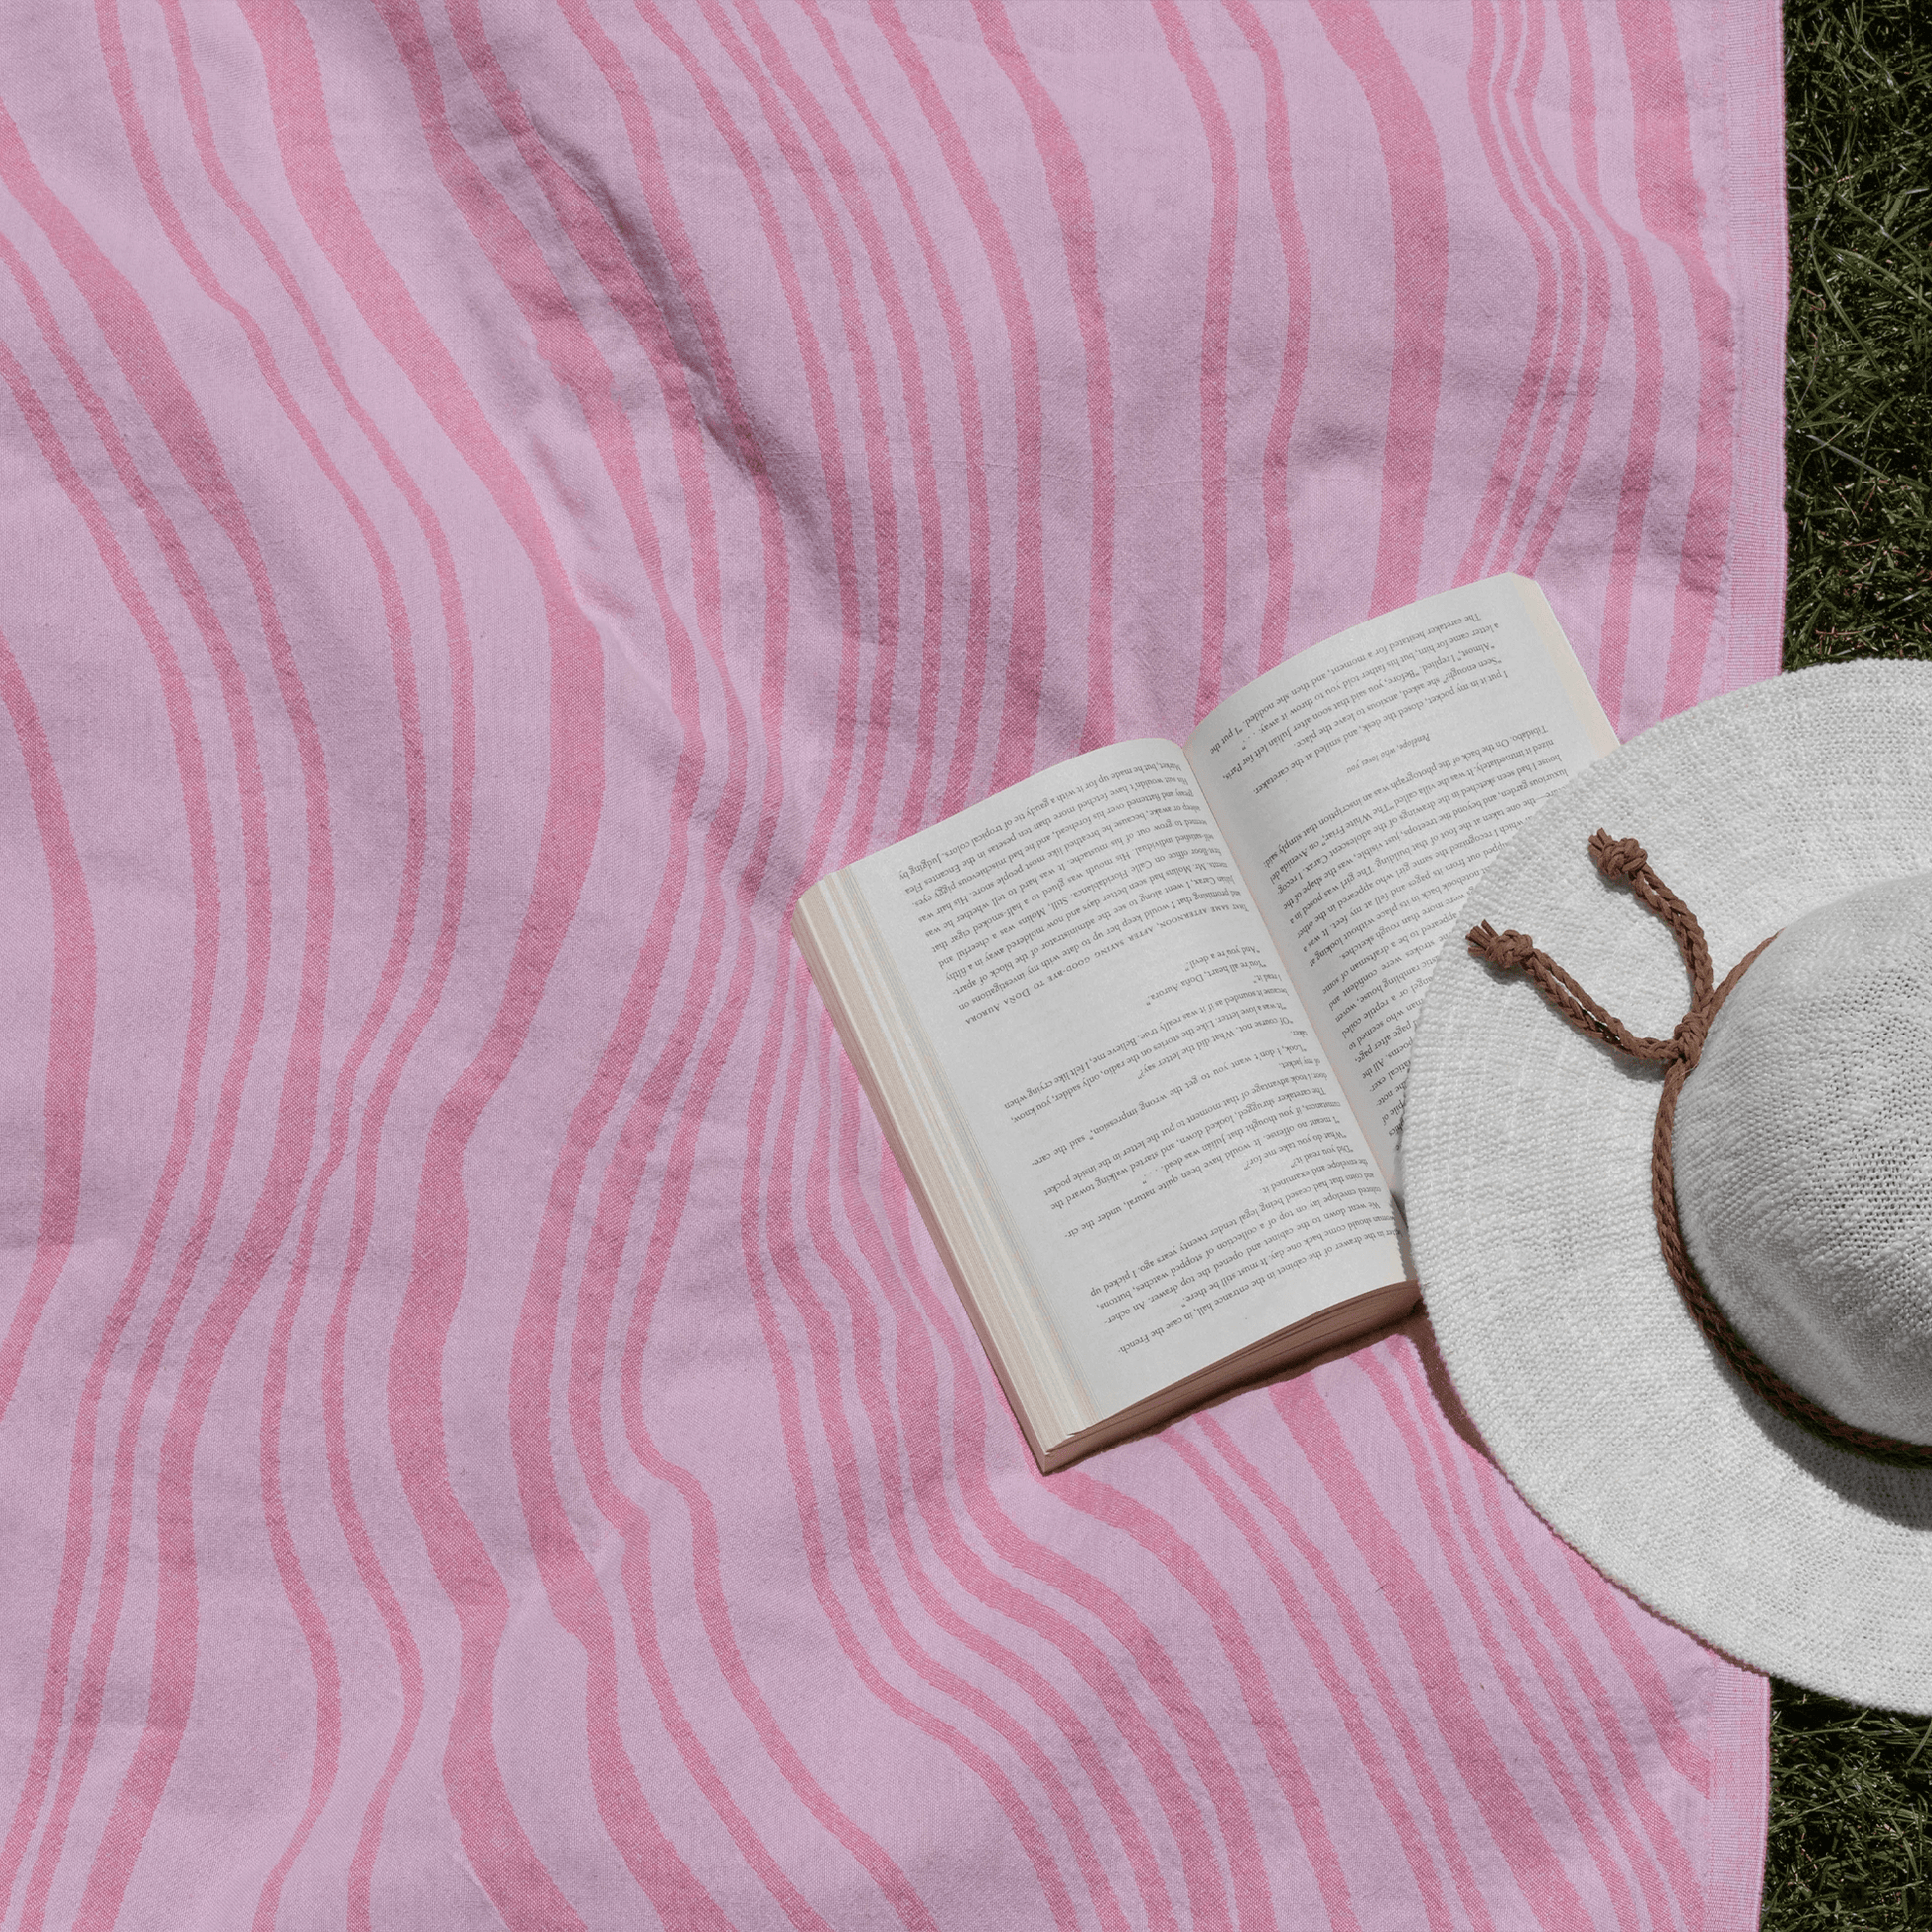 Summer grass with a pink Turkish towel, open book and hat